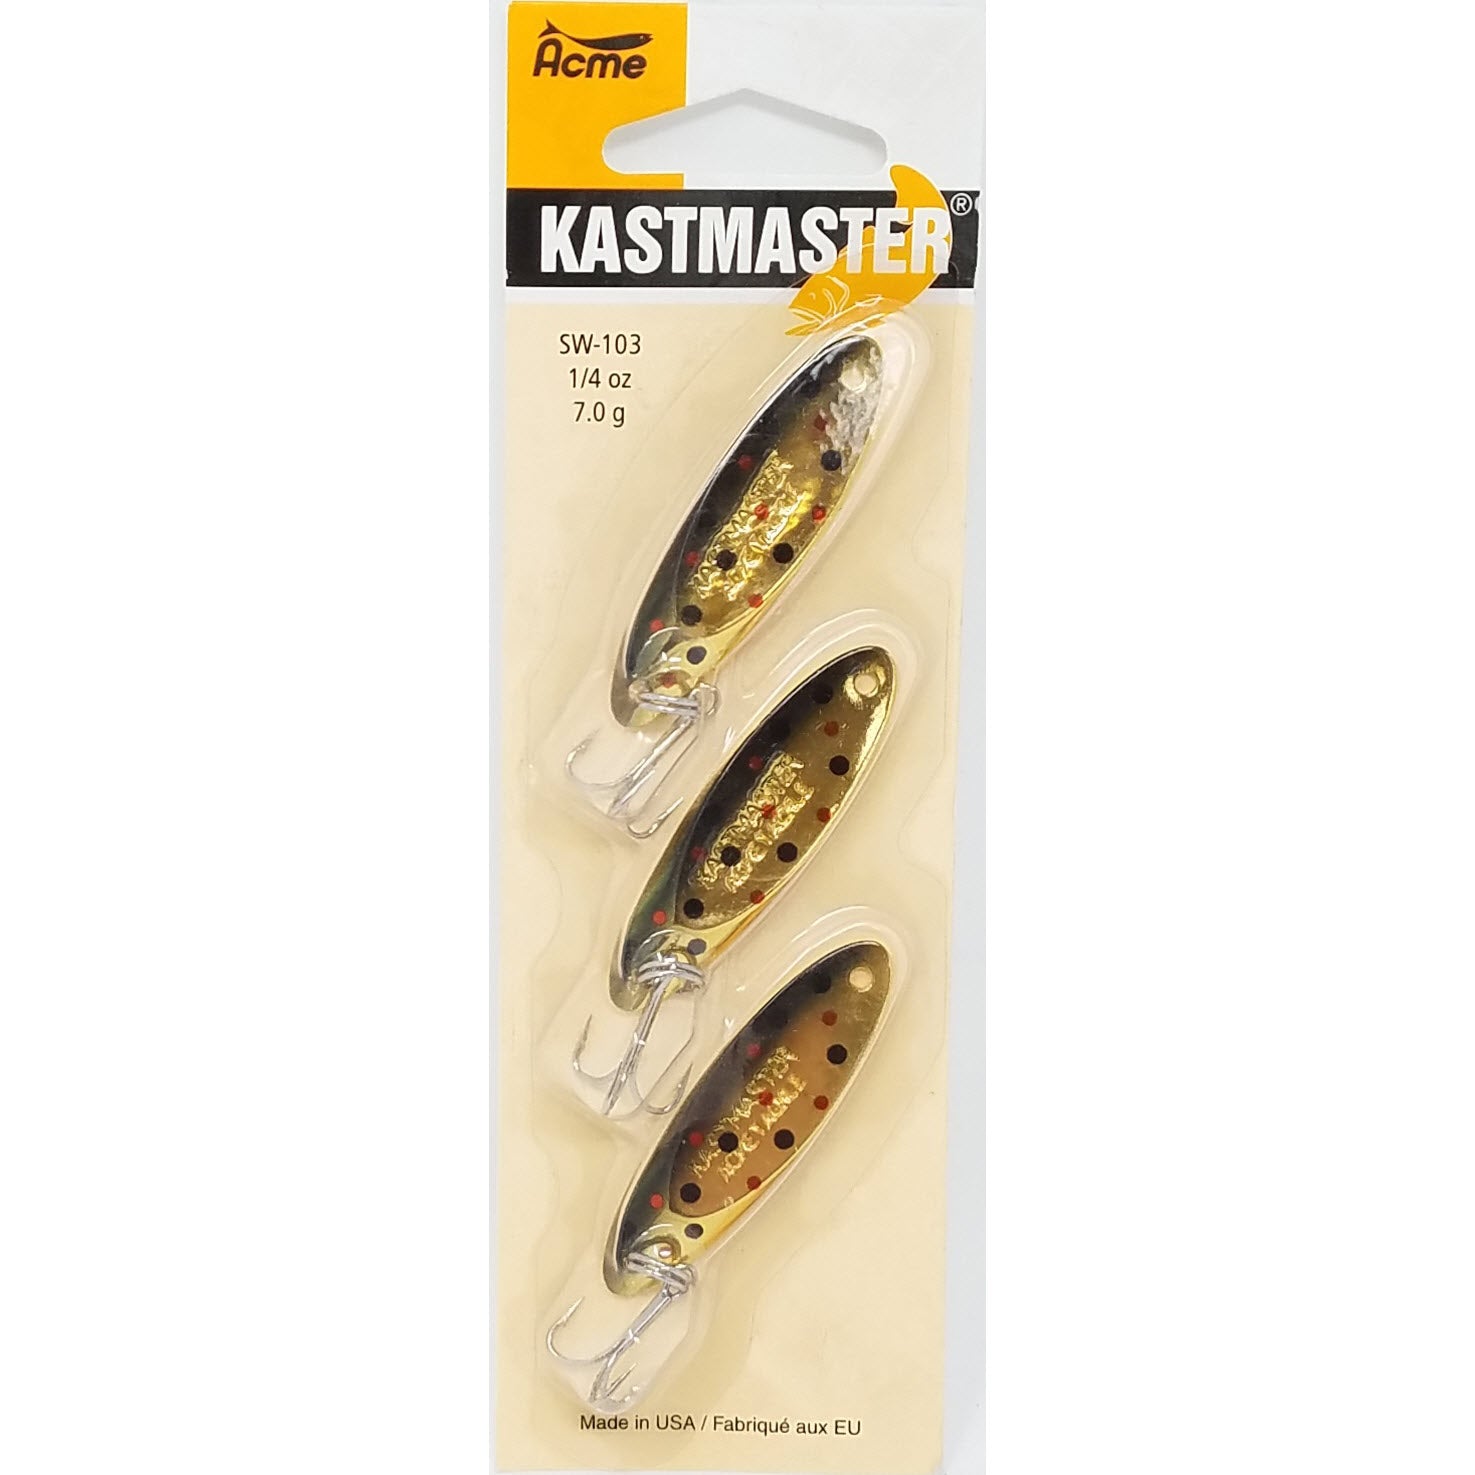 Acme Kastmaster Lures 3 Pack, 1/4 oz., Topwater Lures 